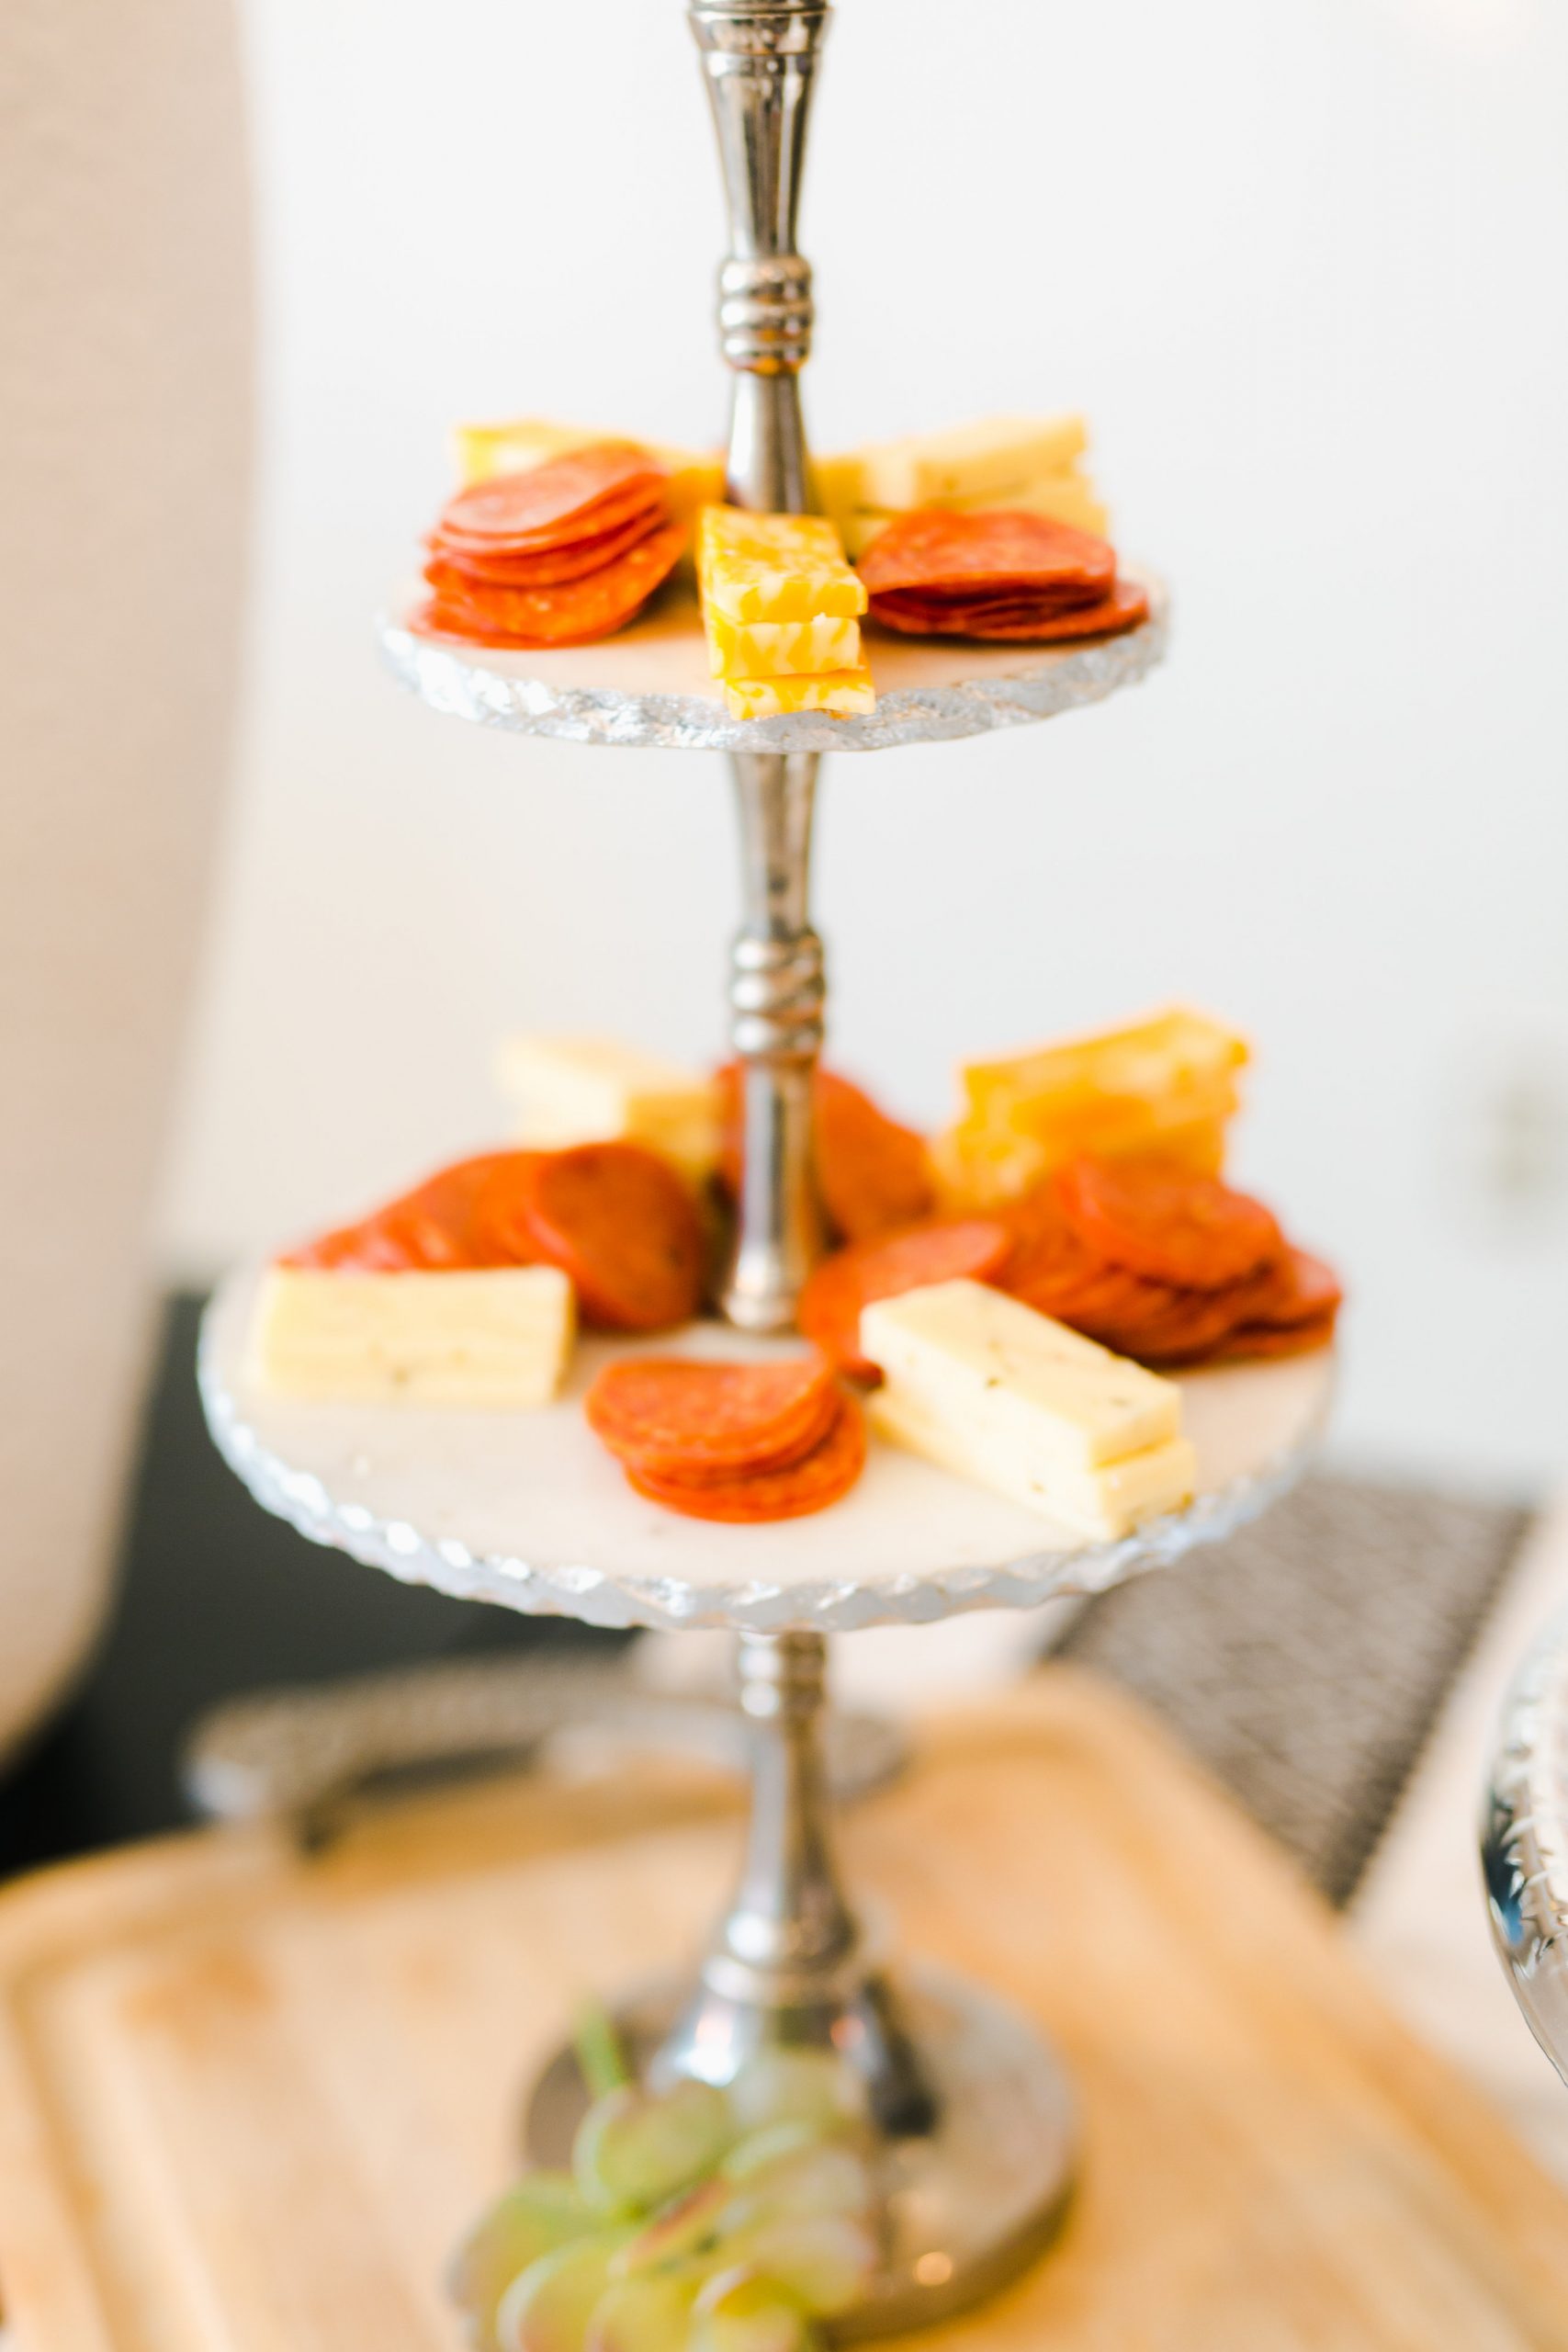 Cheese and Meat Trays at a Bridal Shower Planned by the Maid of Honor